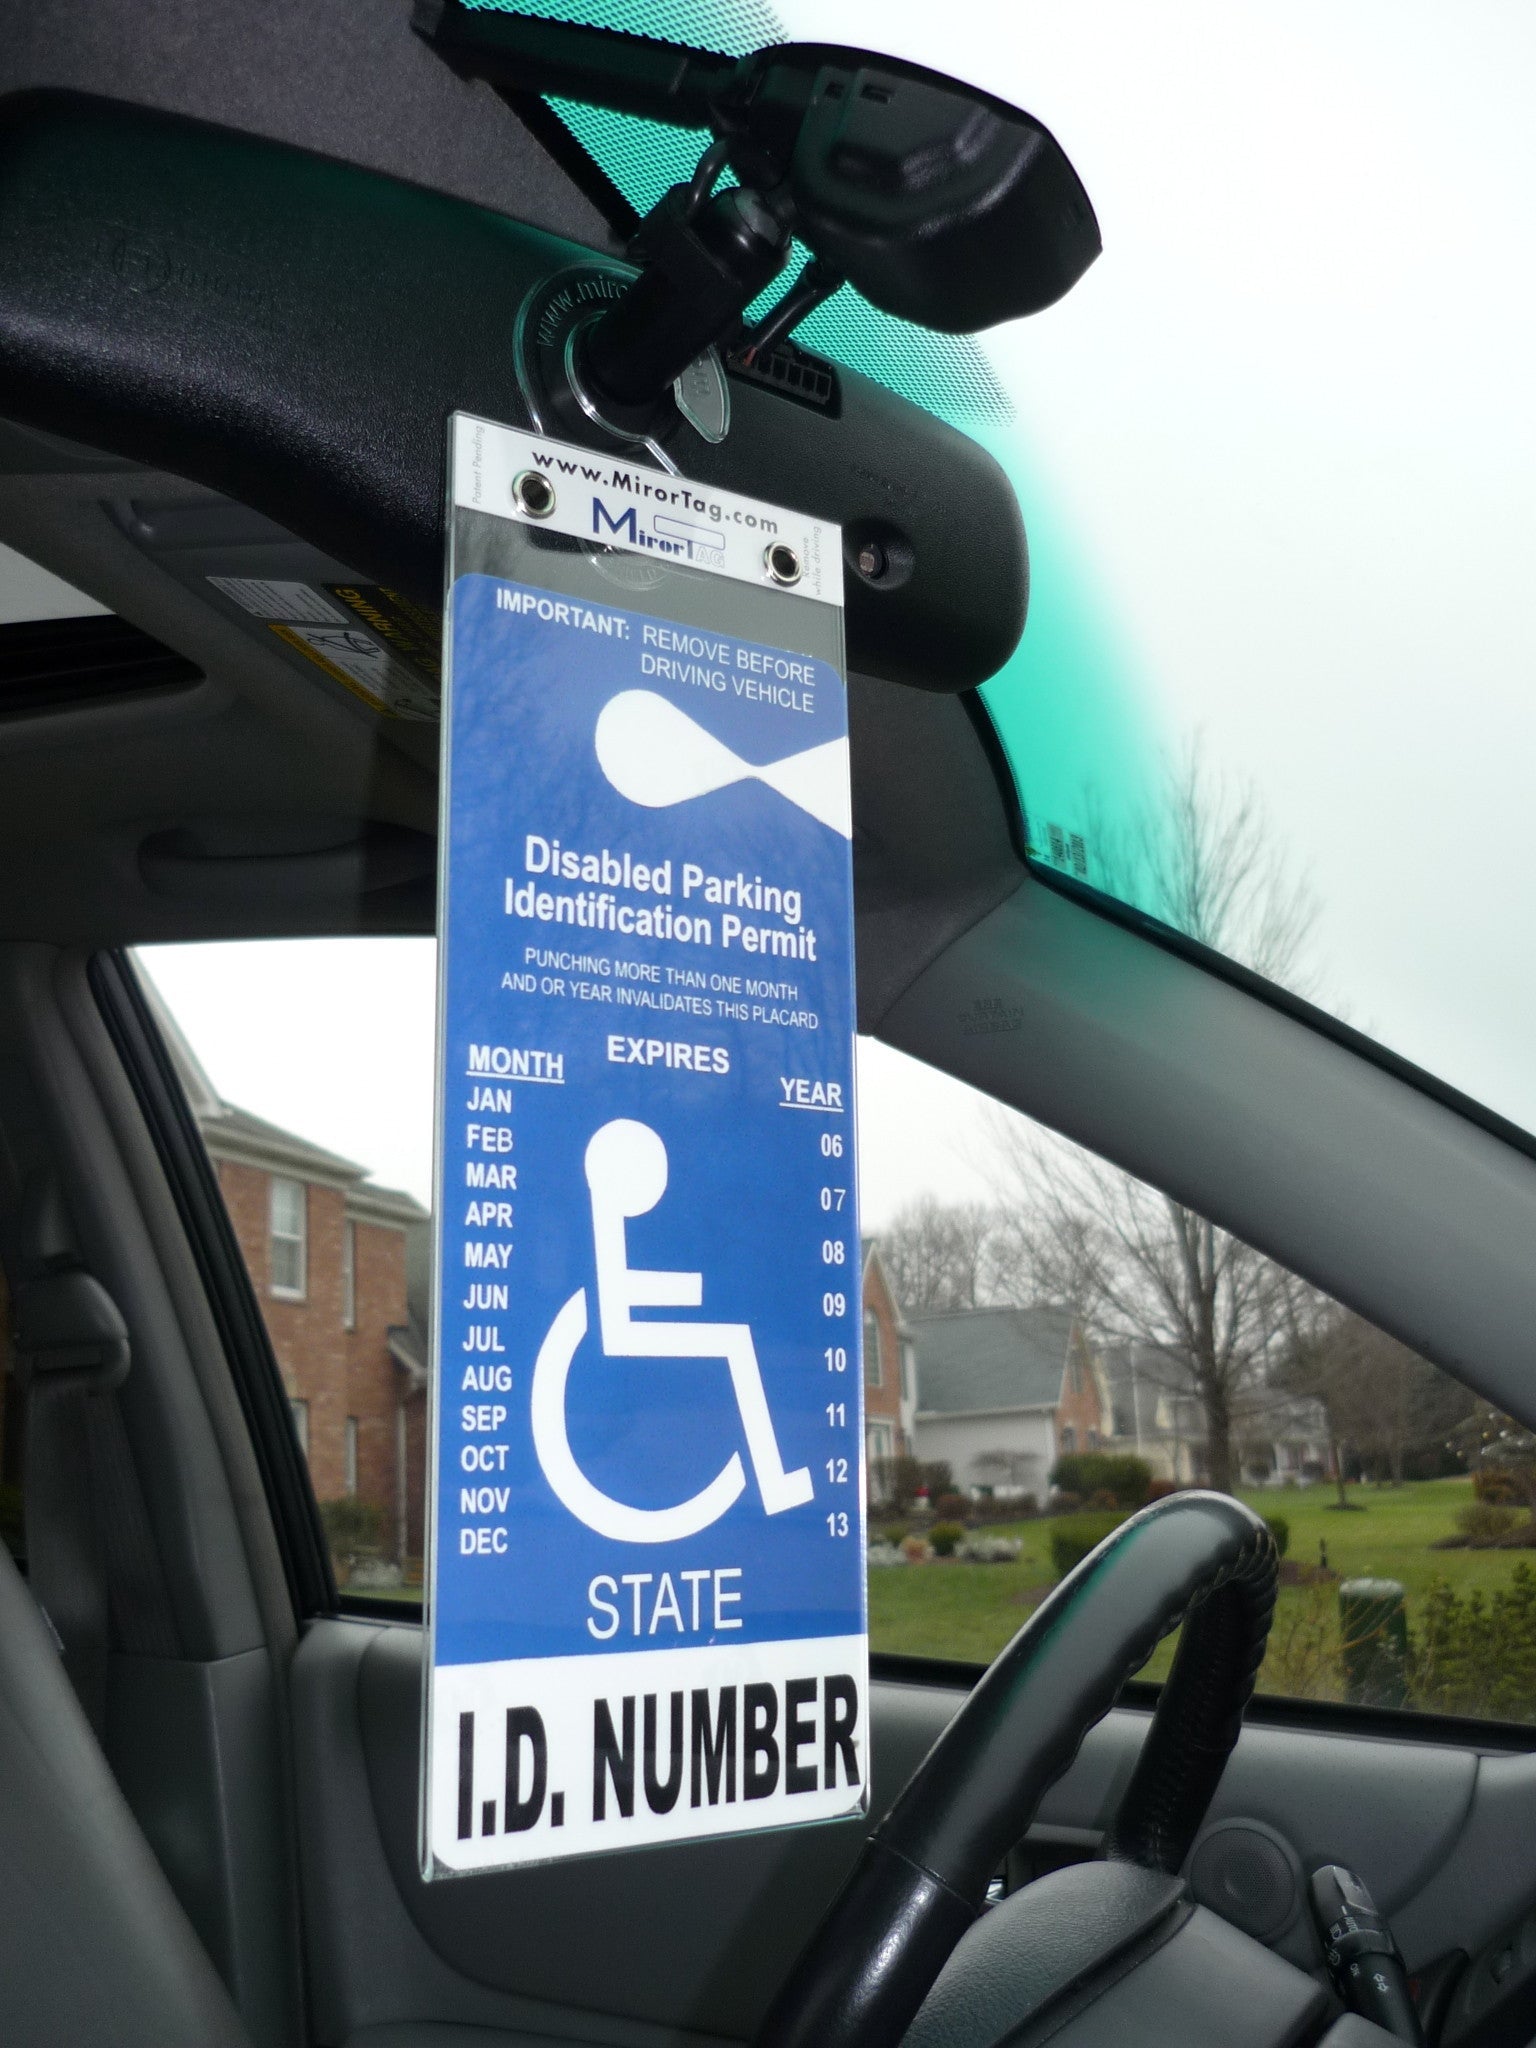 Portable Handicap Placard Holder for Auto. Magnetically display with eyes closed